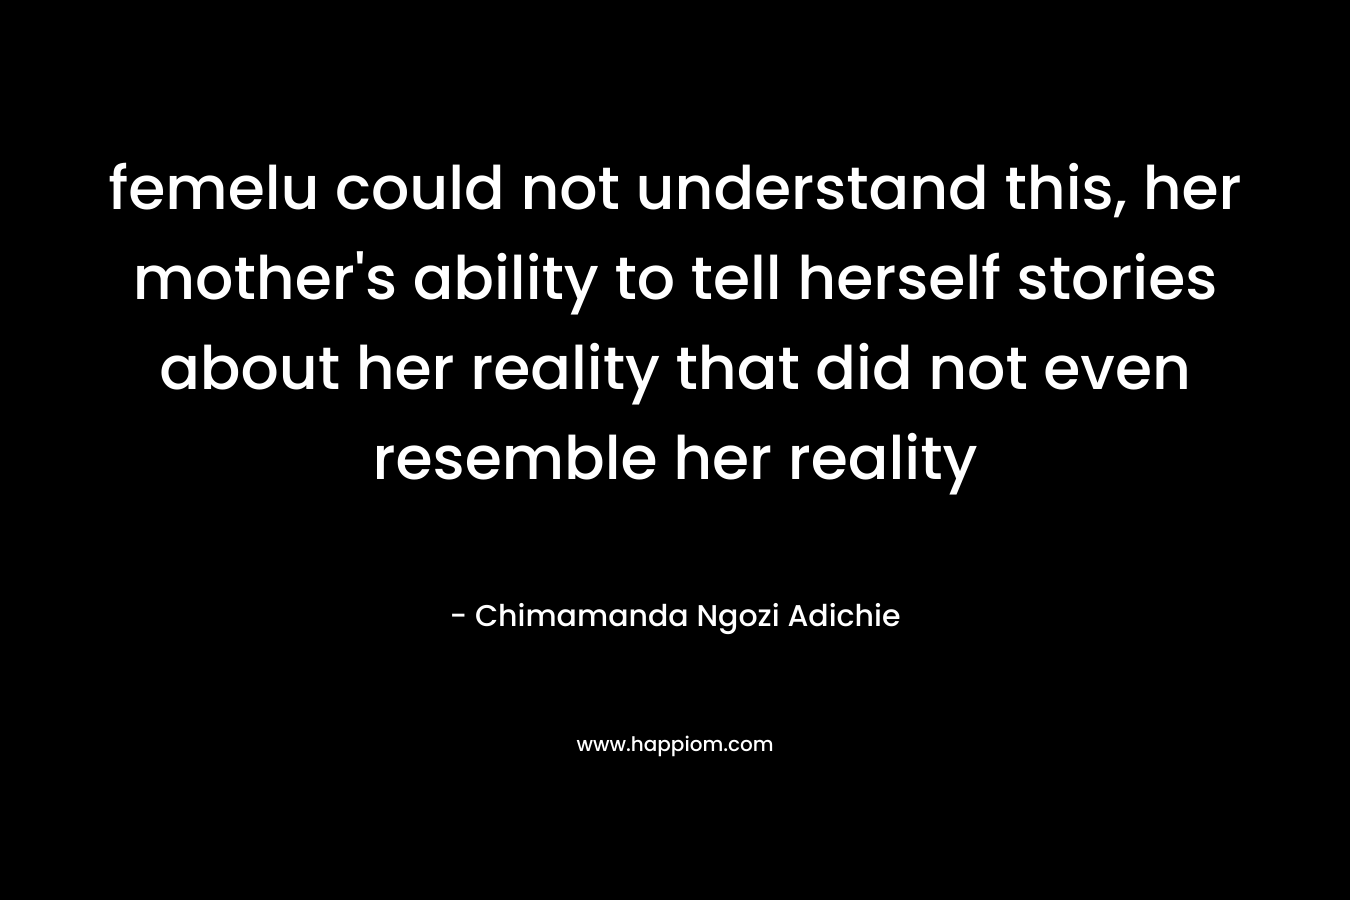 femelu could not understand this, her mother’s ability to tell herself stories about her reality that did not even resemble her reality – Chimamanda Ngozi Adichie